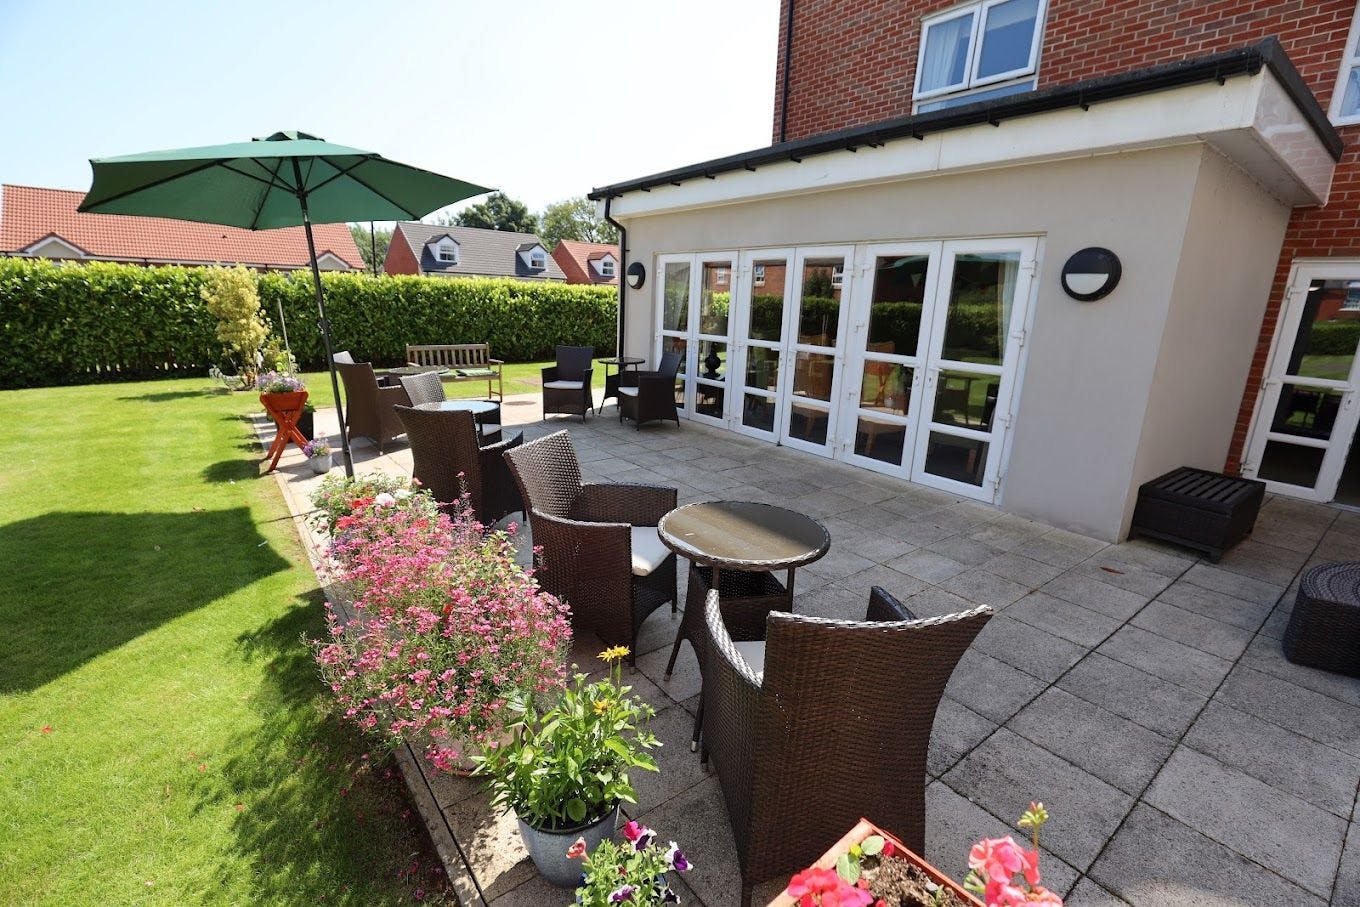 Garden area of The Moors care home in Ripon, Yorkshire